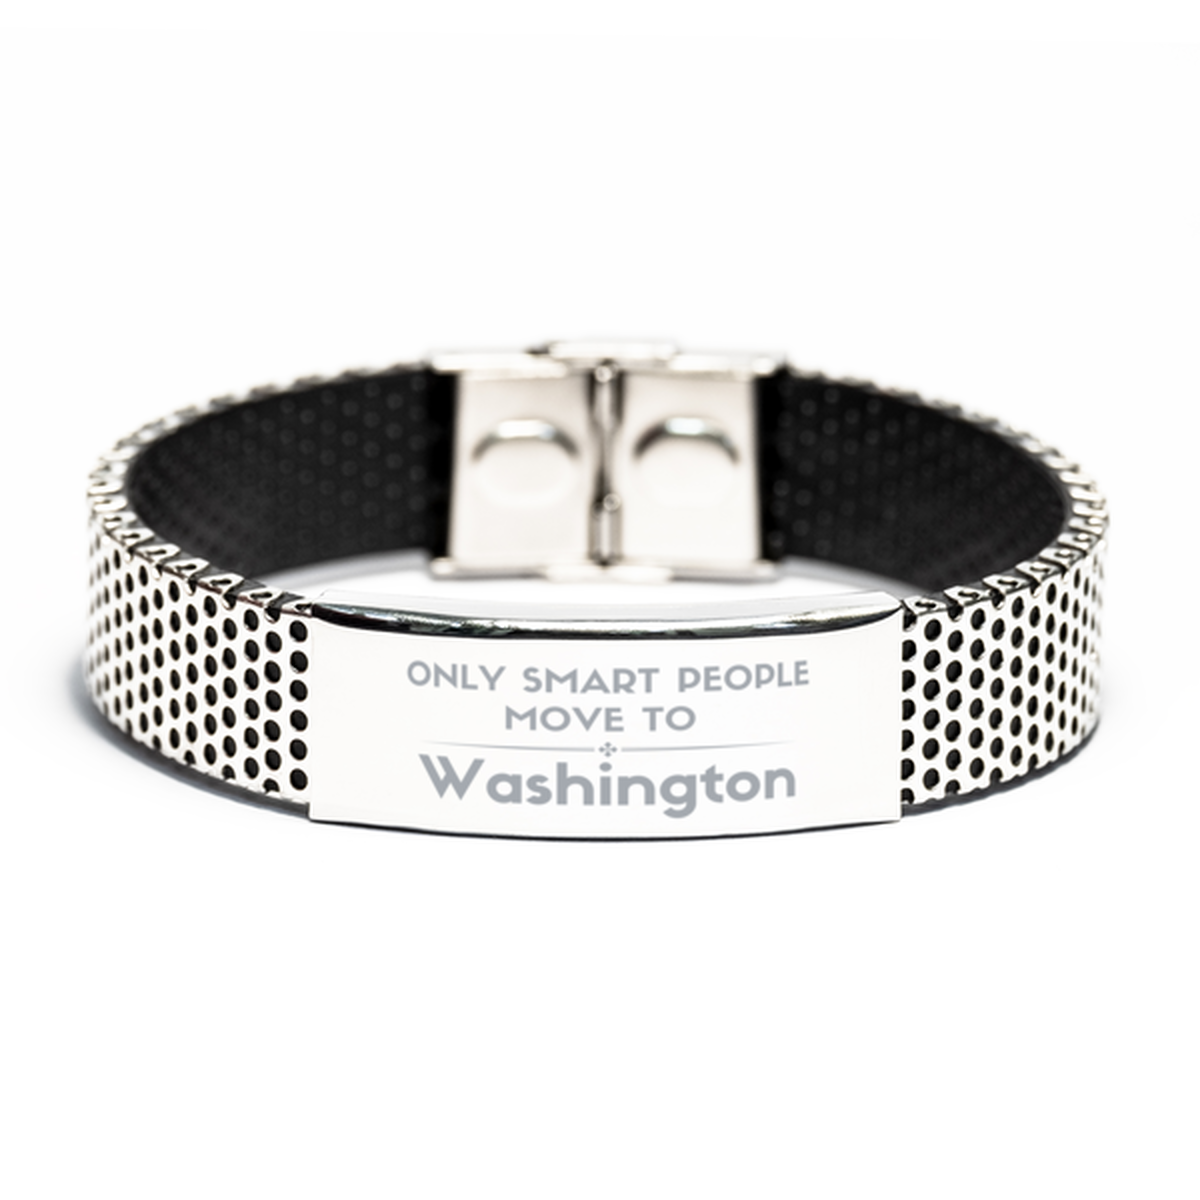 Only smart people move to Washington Stainless Steel Bracelet, Gag Gifts For Washington, Move to Washington Gifts for Friends Coworker Funny Saying Quote